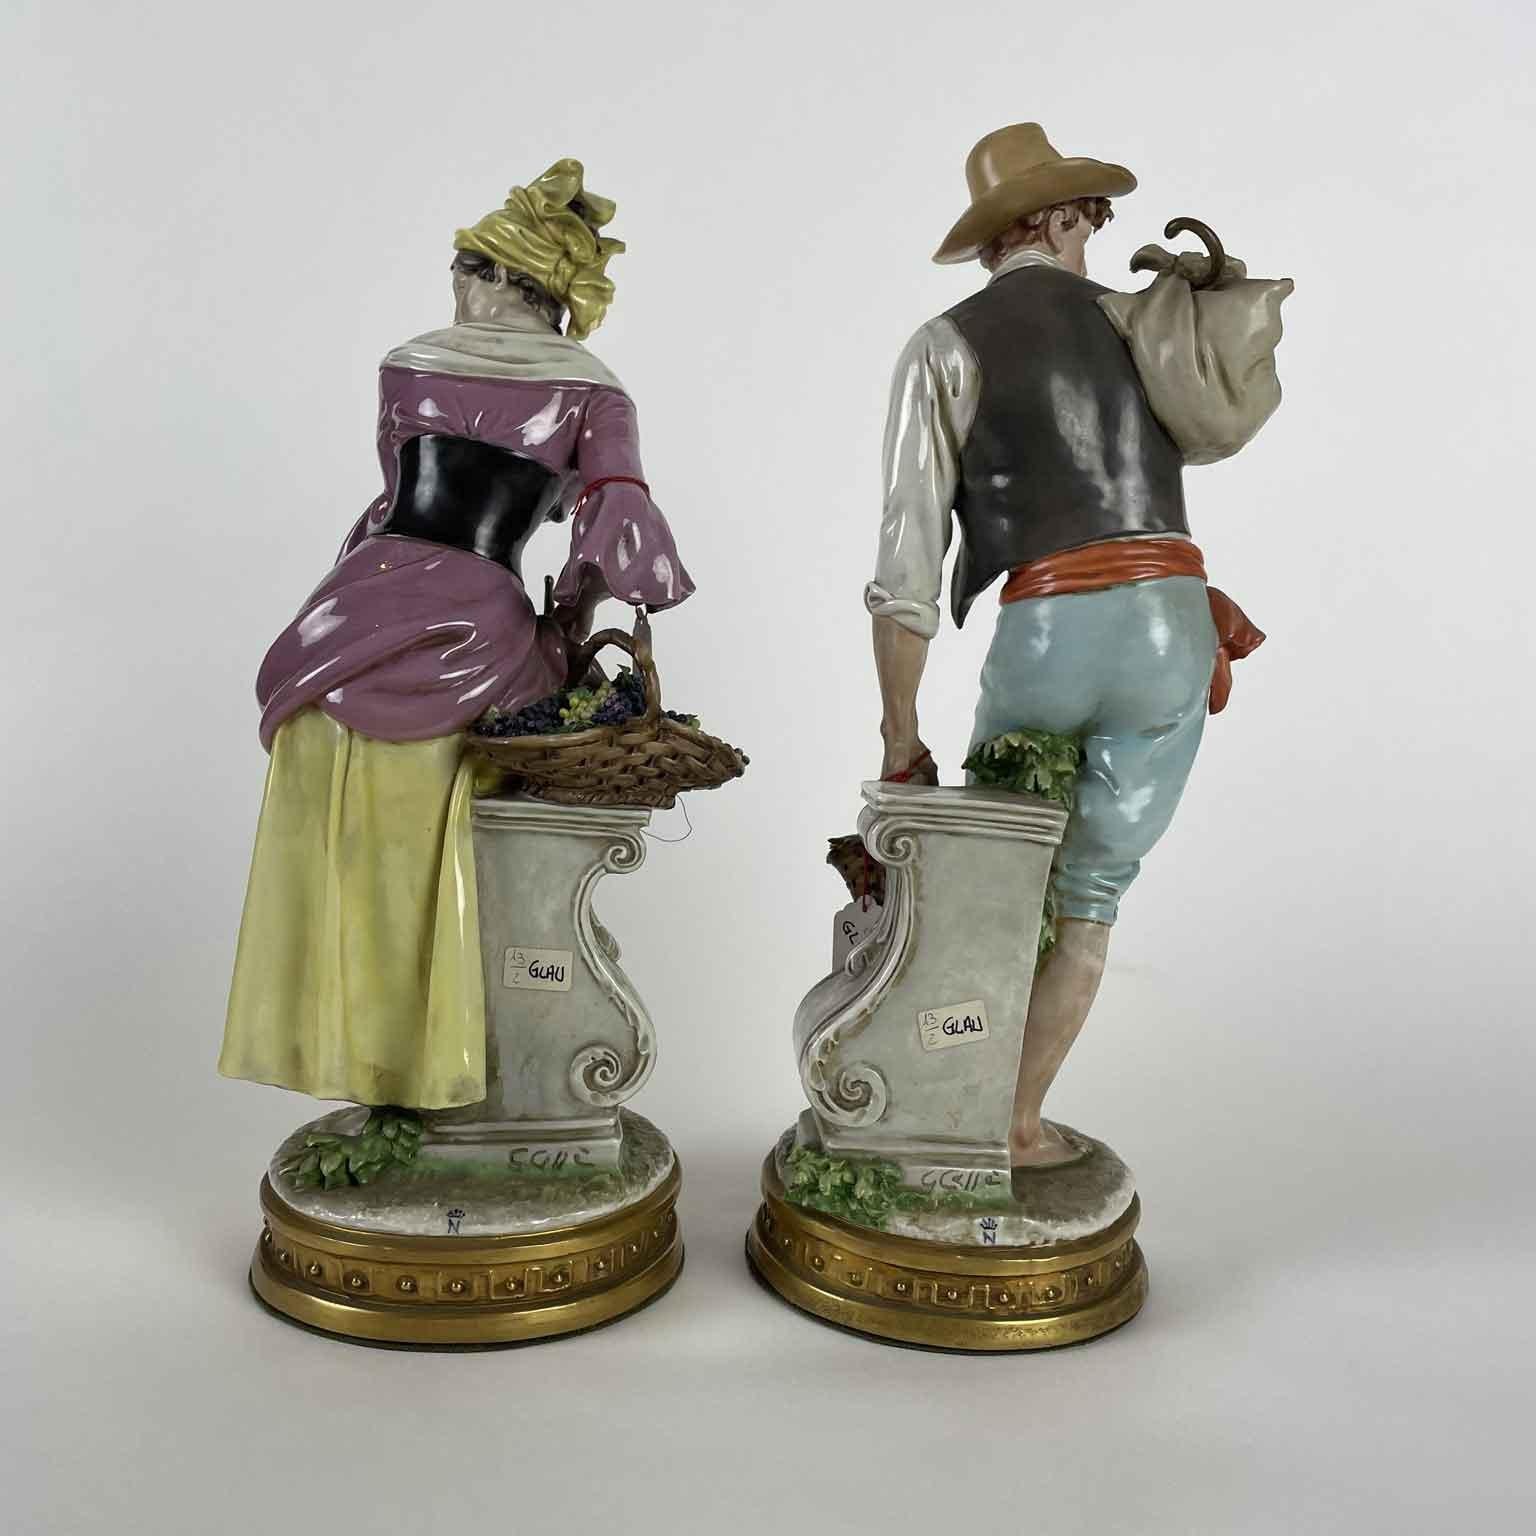 Neoclassical Revival Pair of Italian Peasant Figures Allegory of Abundance by Cappe Giuseppe, 1960s For Sale